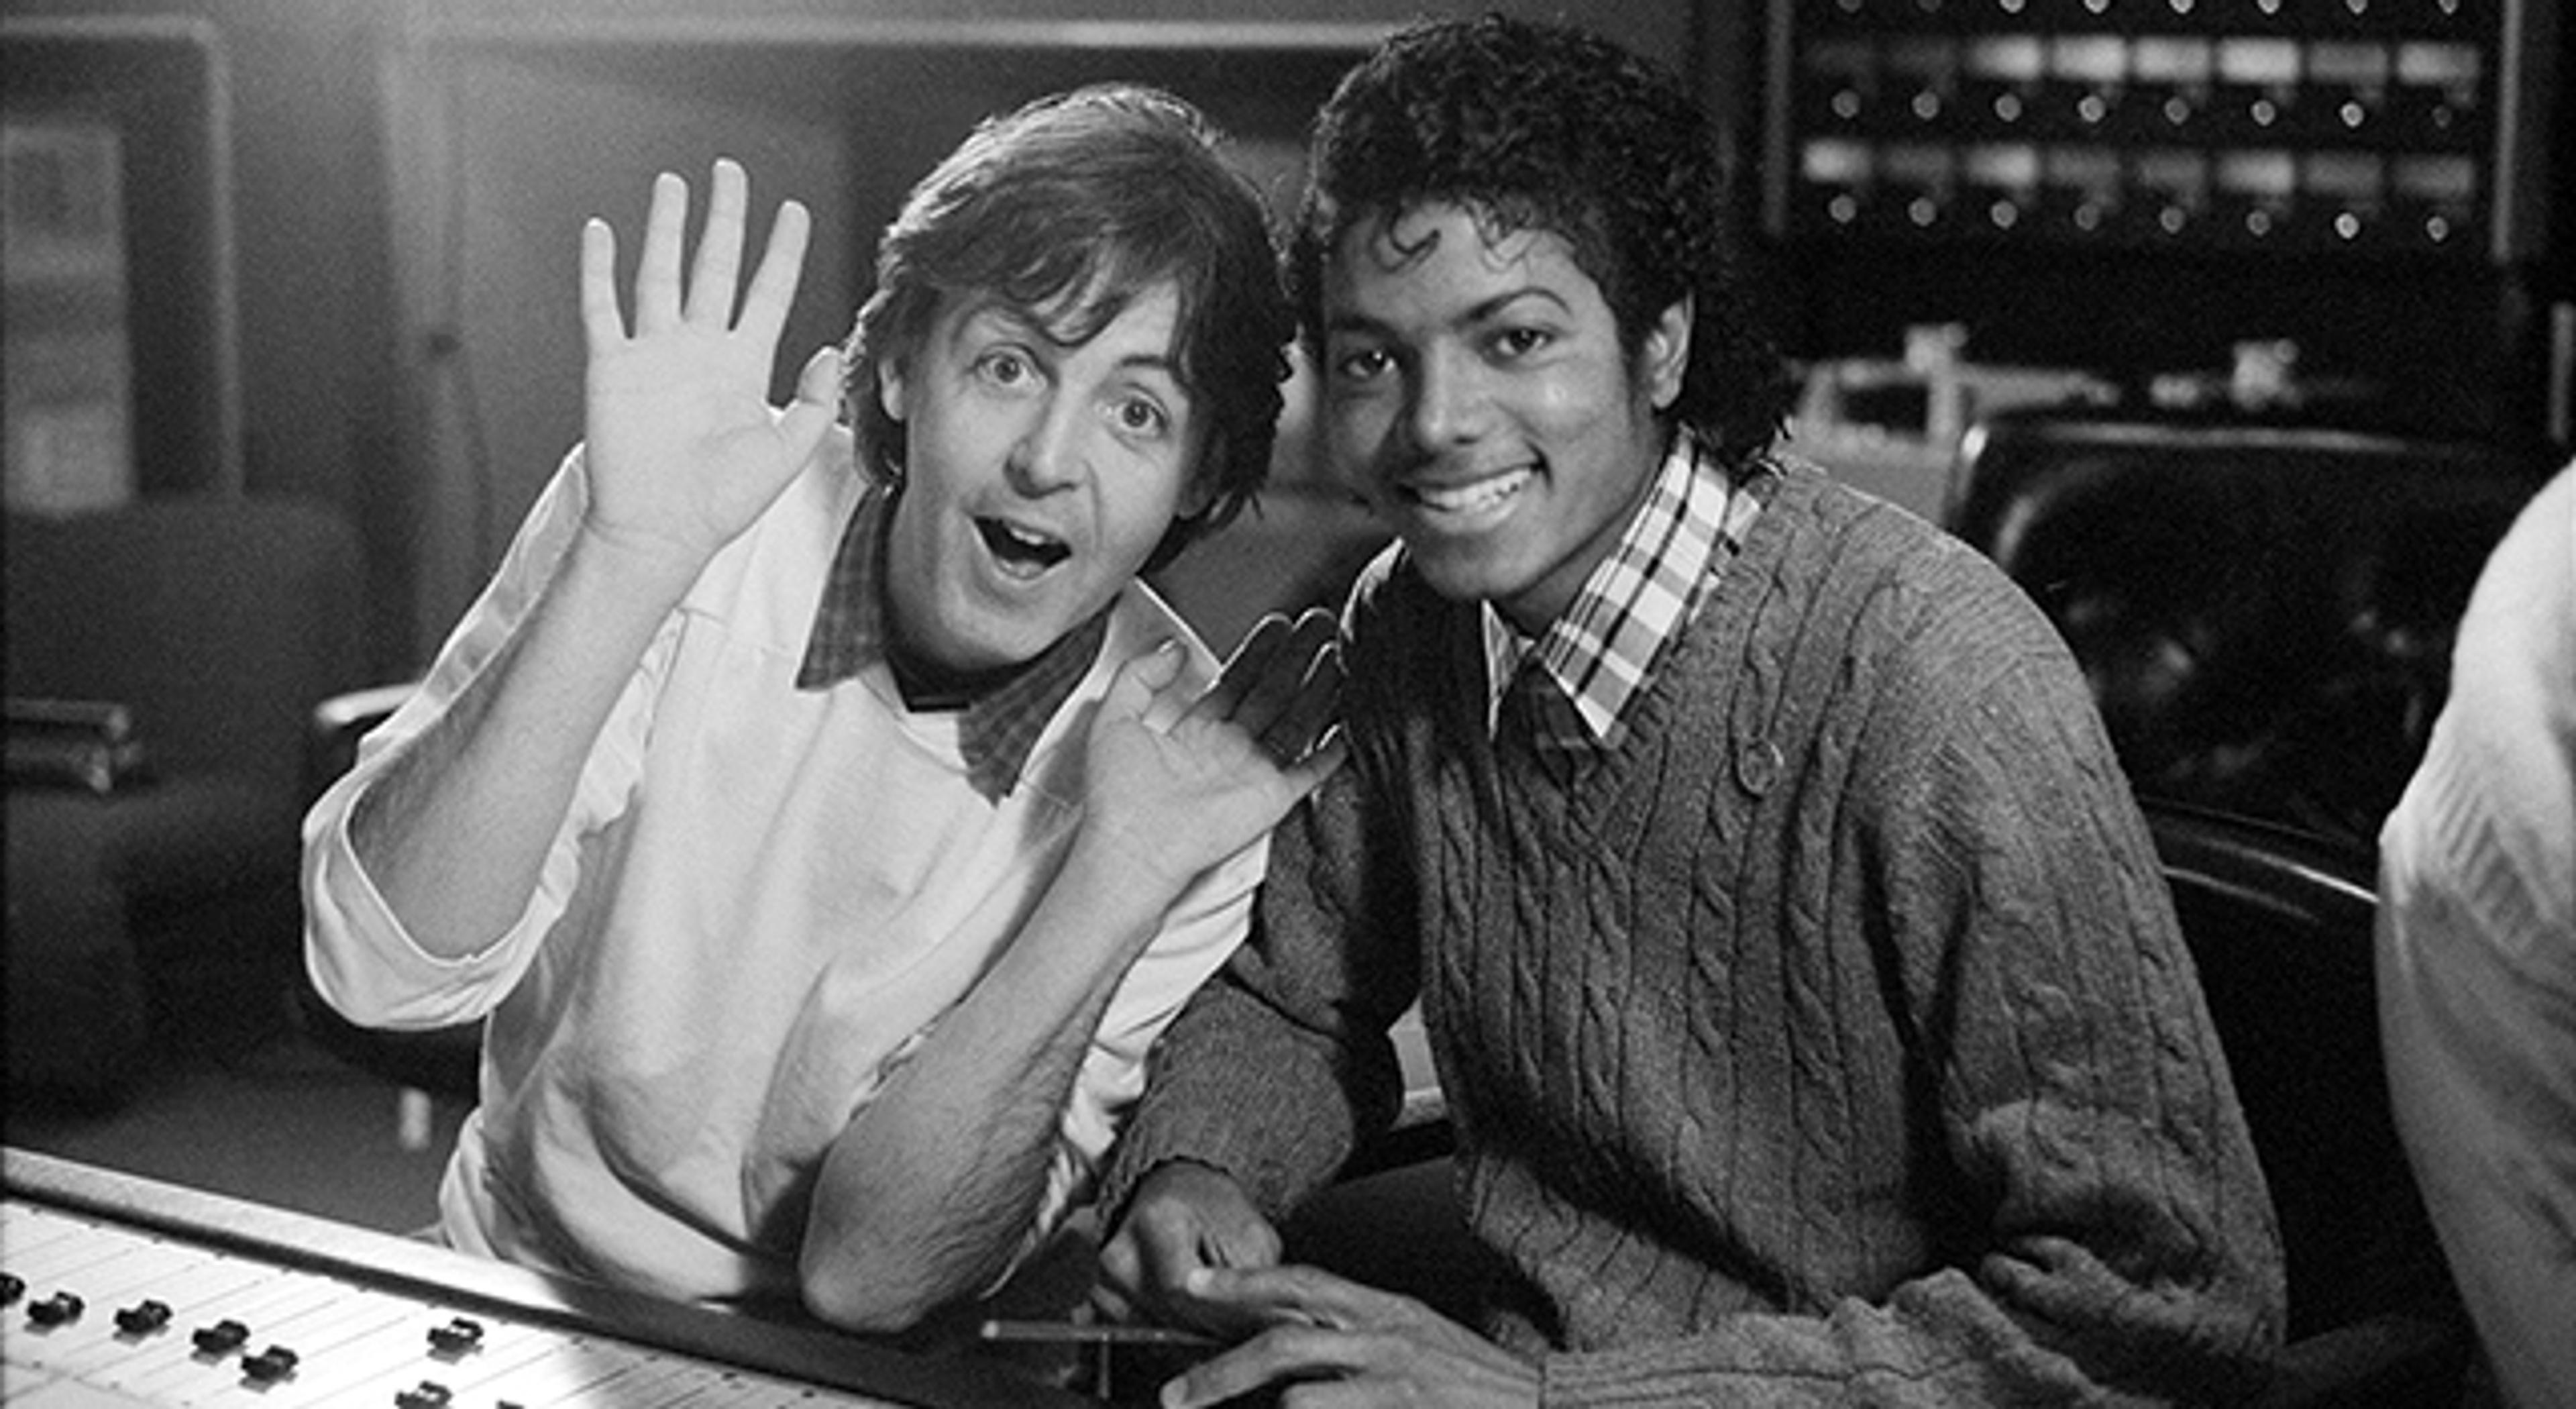 New Competition: ‘Say Say Say [2015 Remix]’ Fan Video